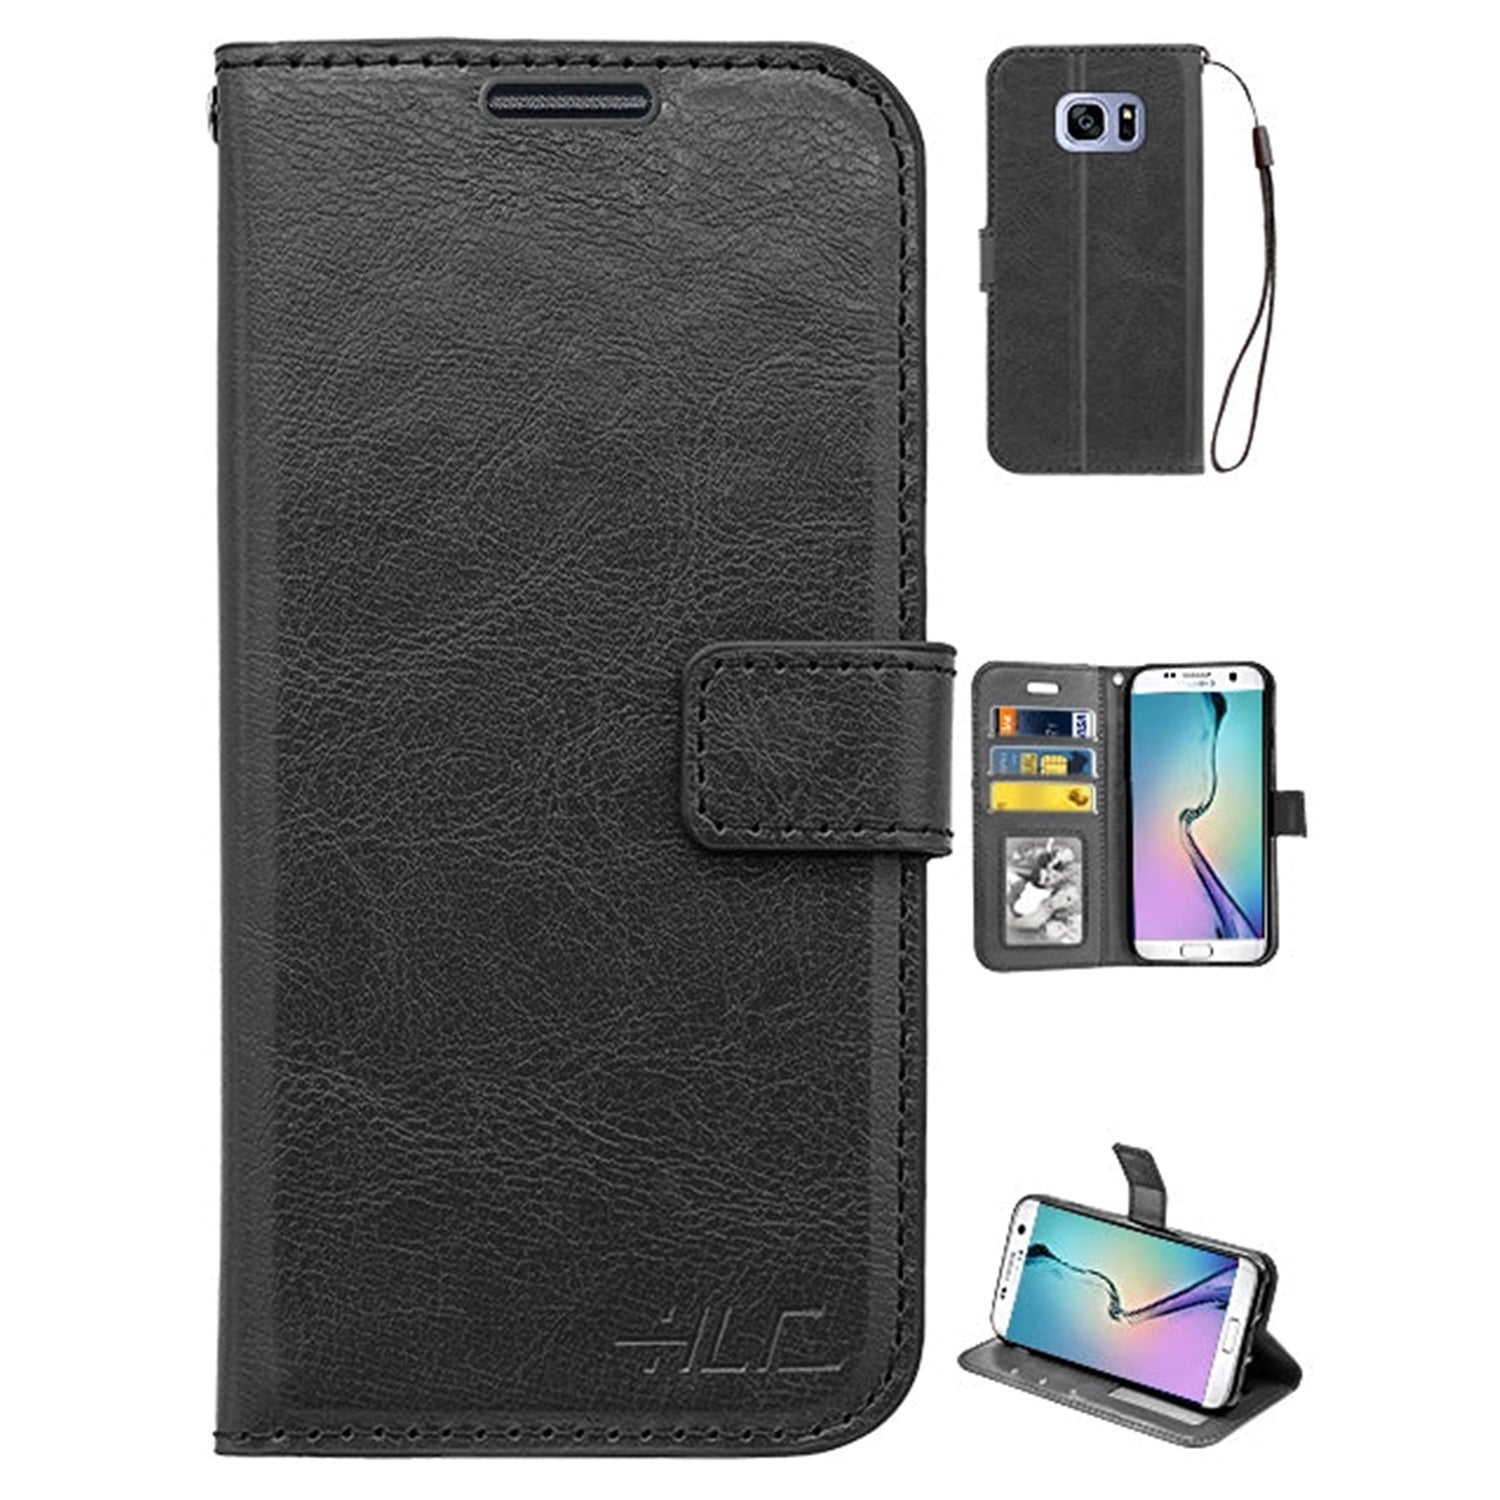 Real Plain Leather Wallet Case for Galaxy S7 Edge